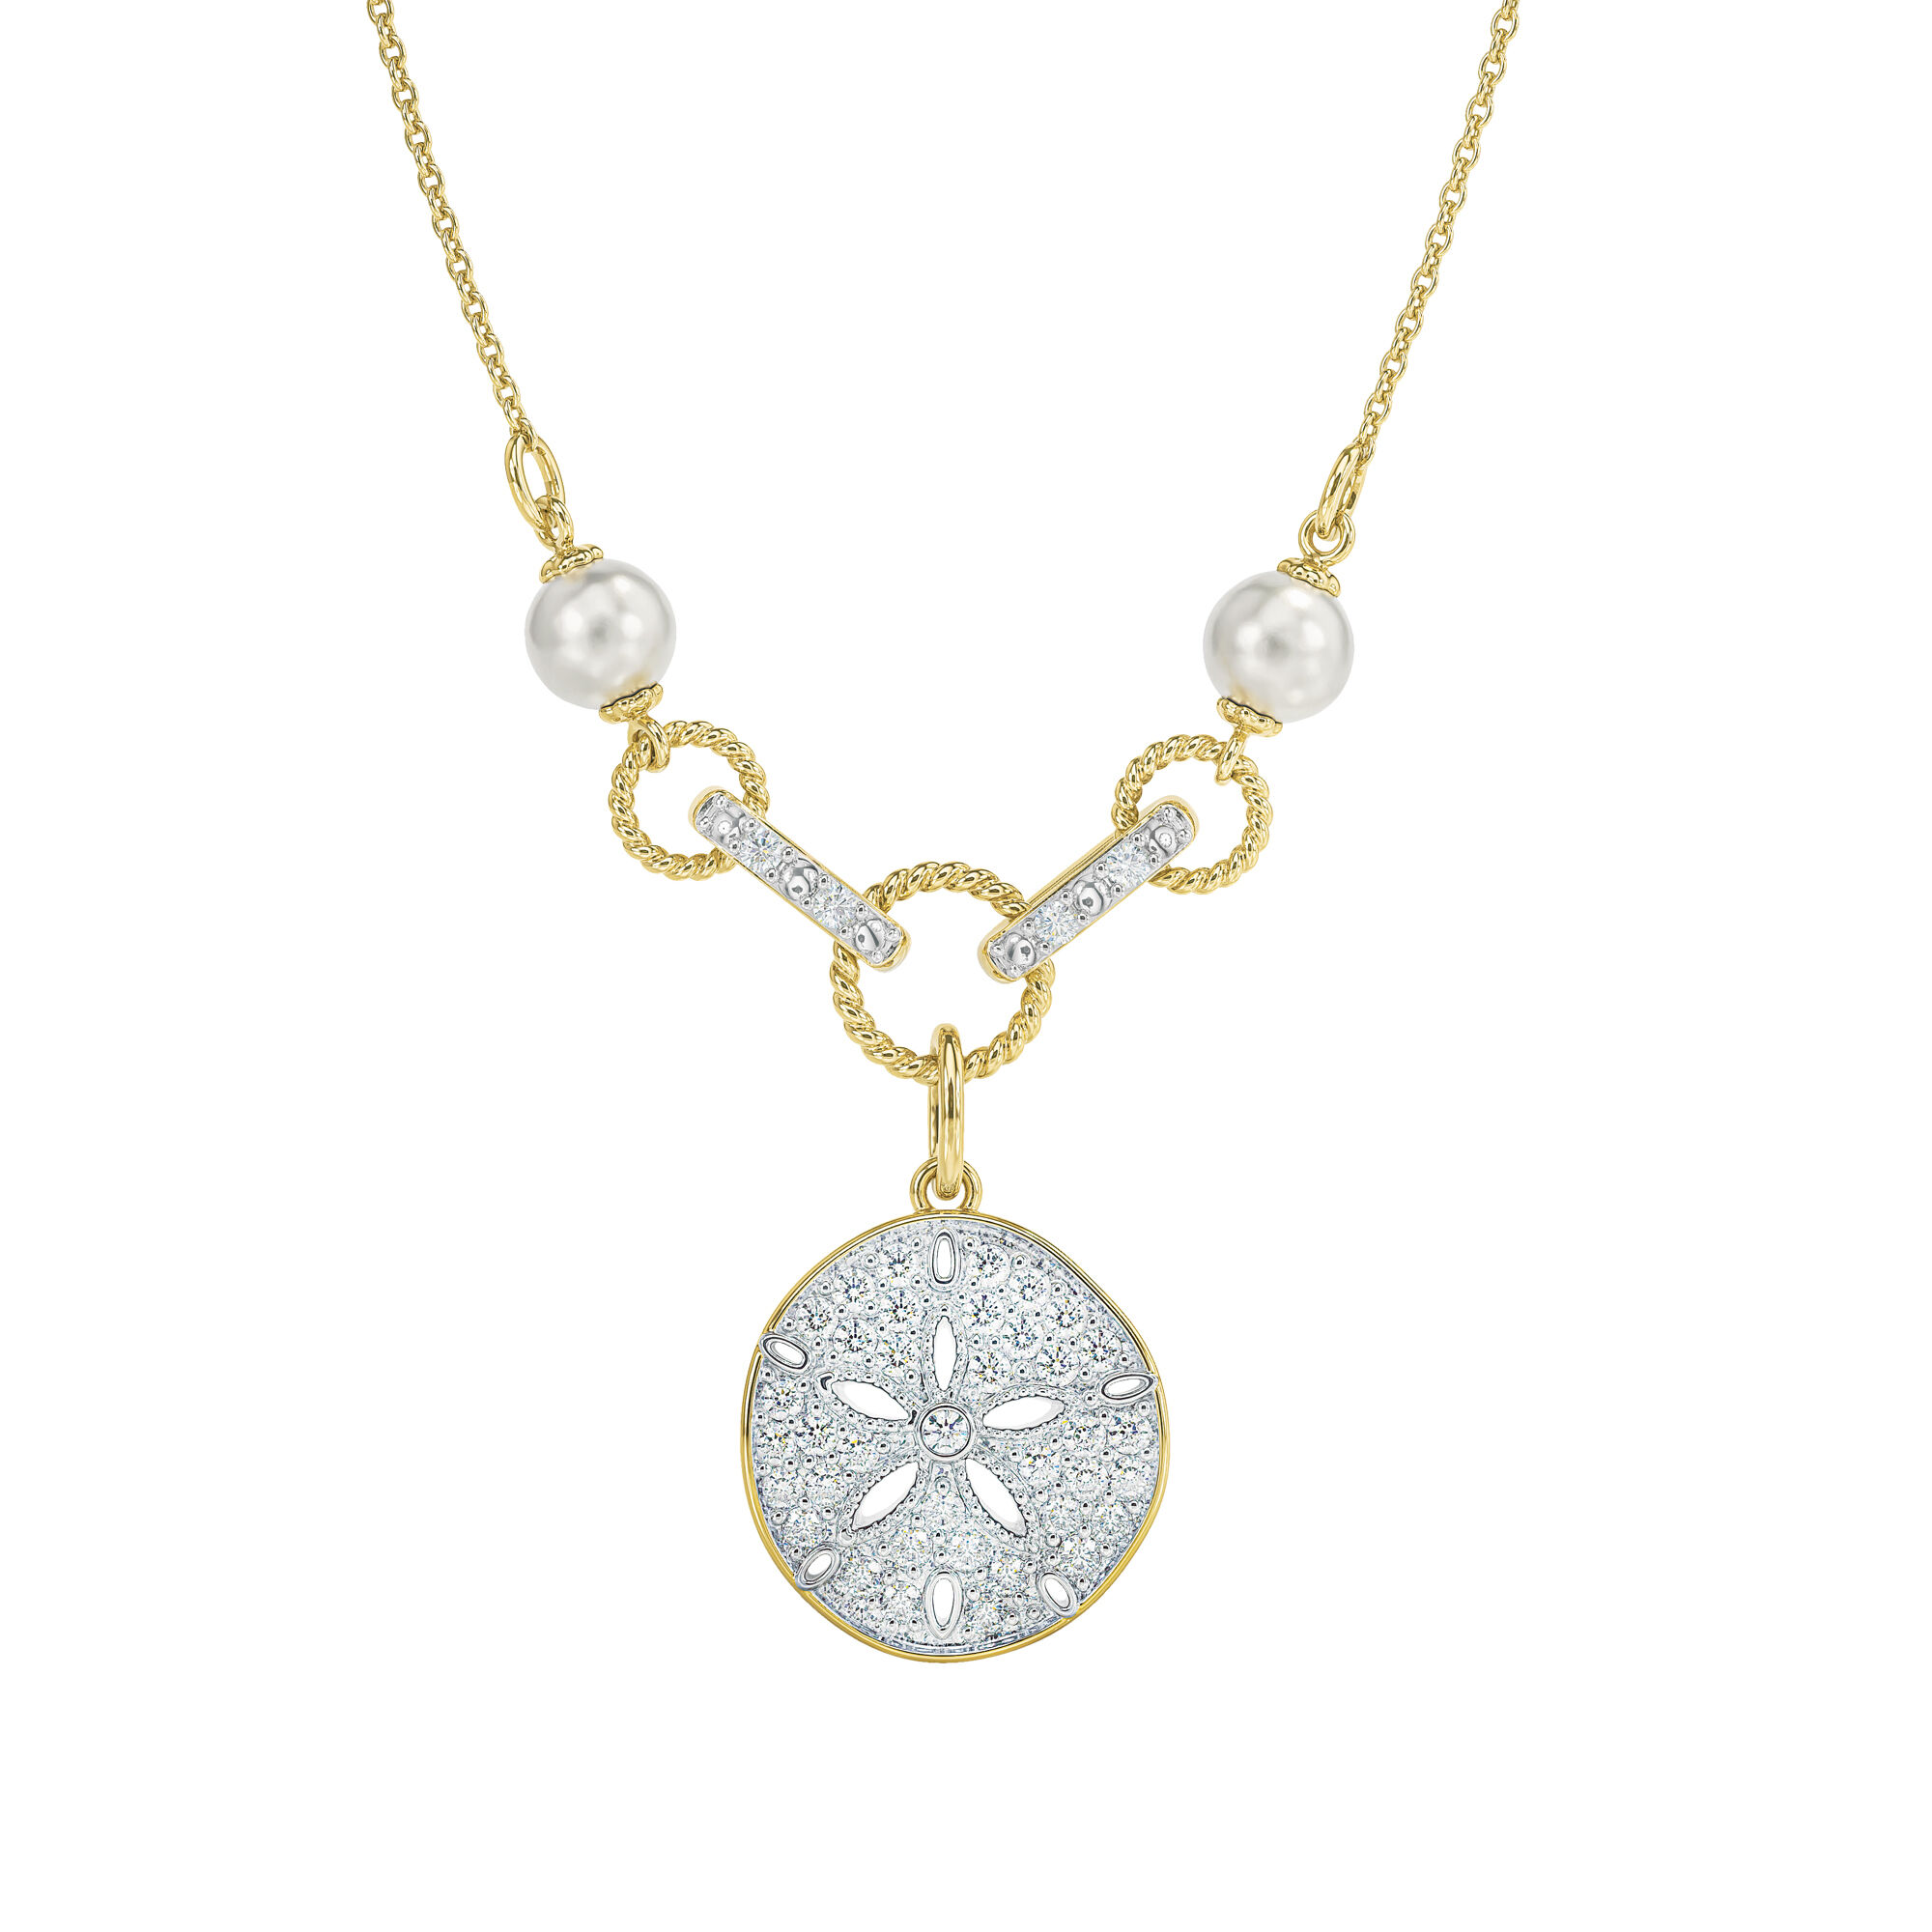 Legend of the Sand Dollar Diamond and Pearl Necklace 6790 0019 a main